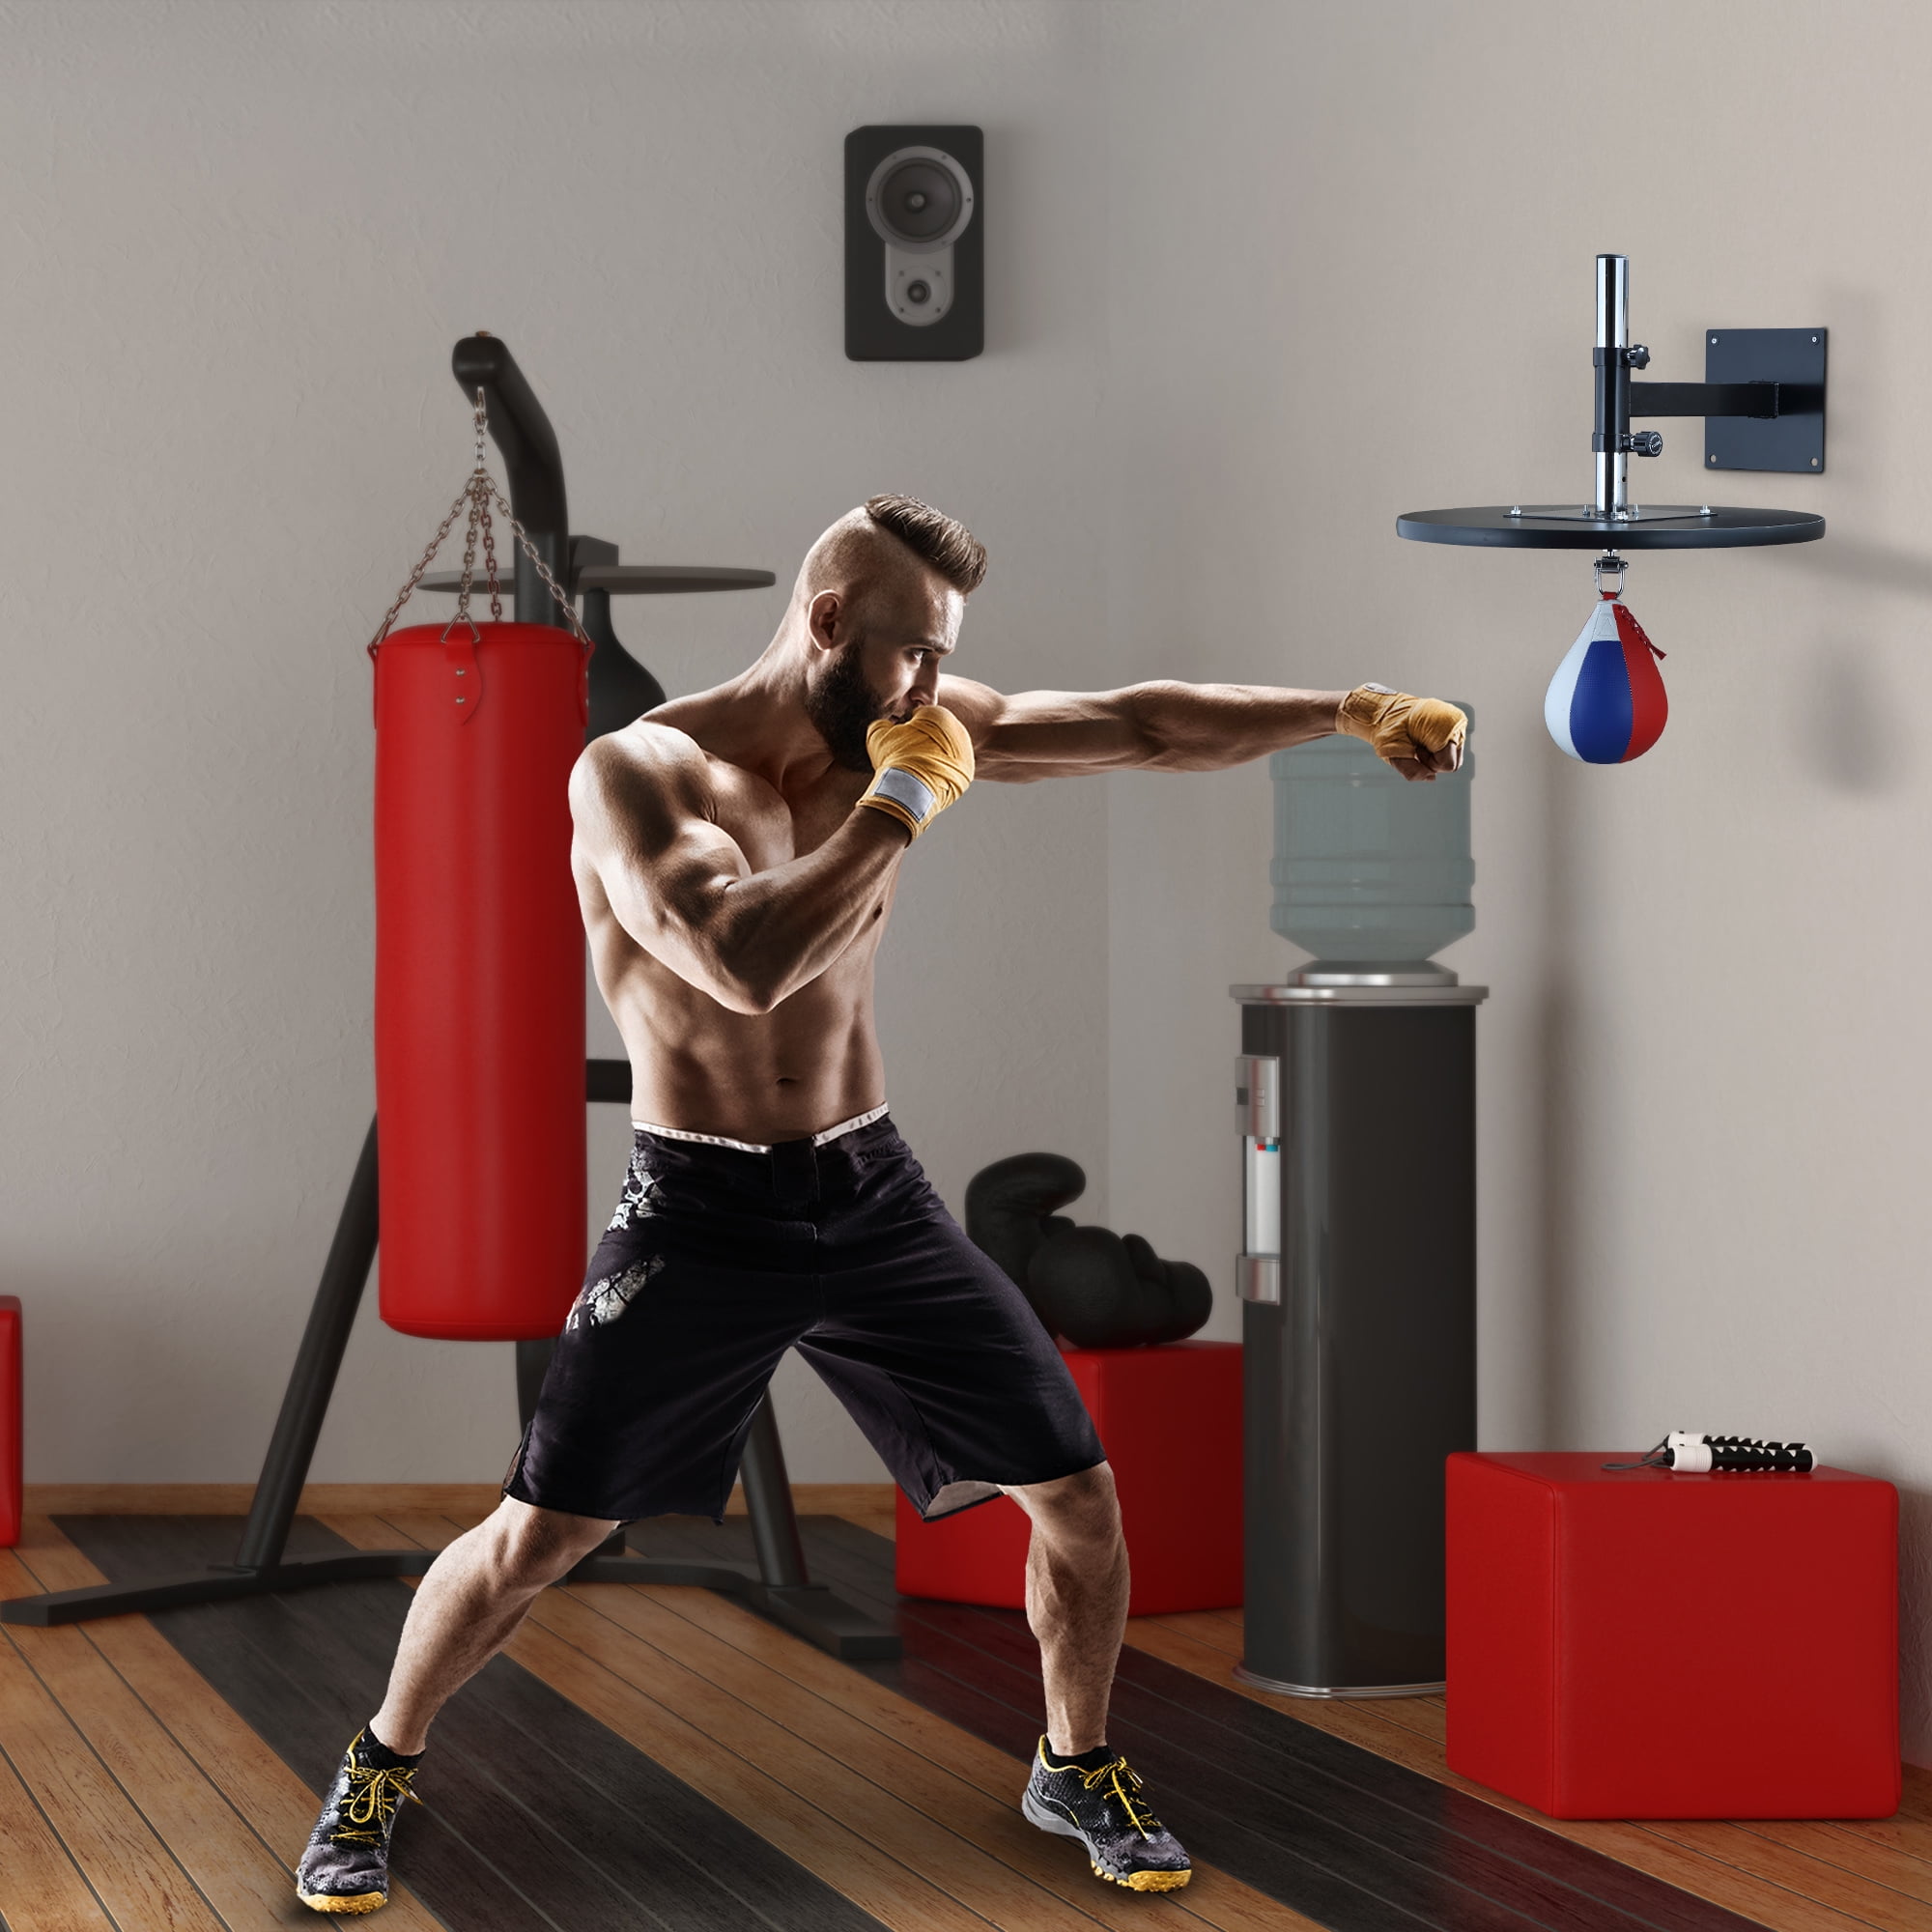 Buy Punching Bag Set for Adults with Gloves, Heavy Punching Bags Hanging, Boxing  Fitness Workout Training Kick - Unfilled Online at Low Prices in India -  Amazon.in